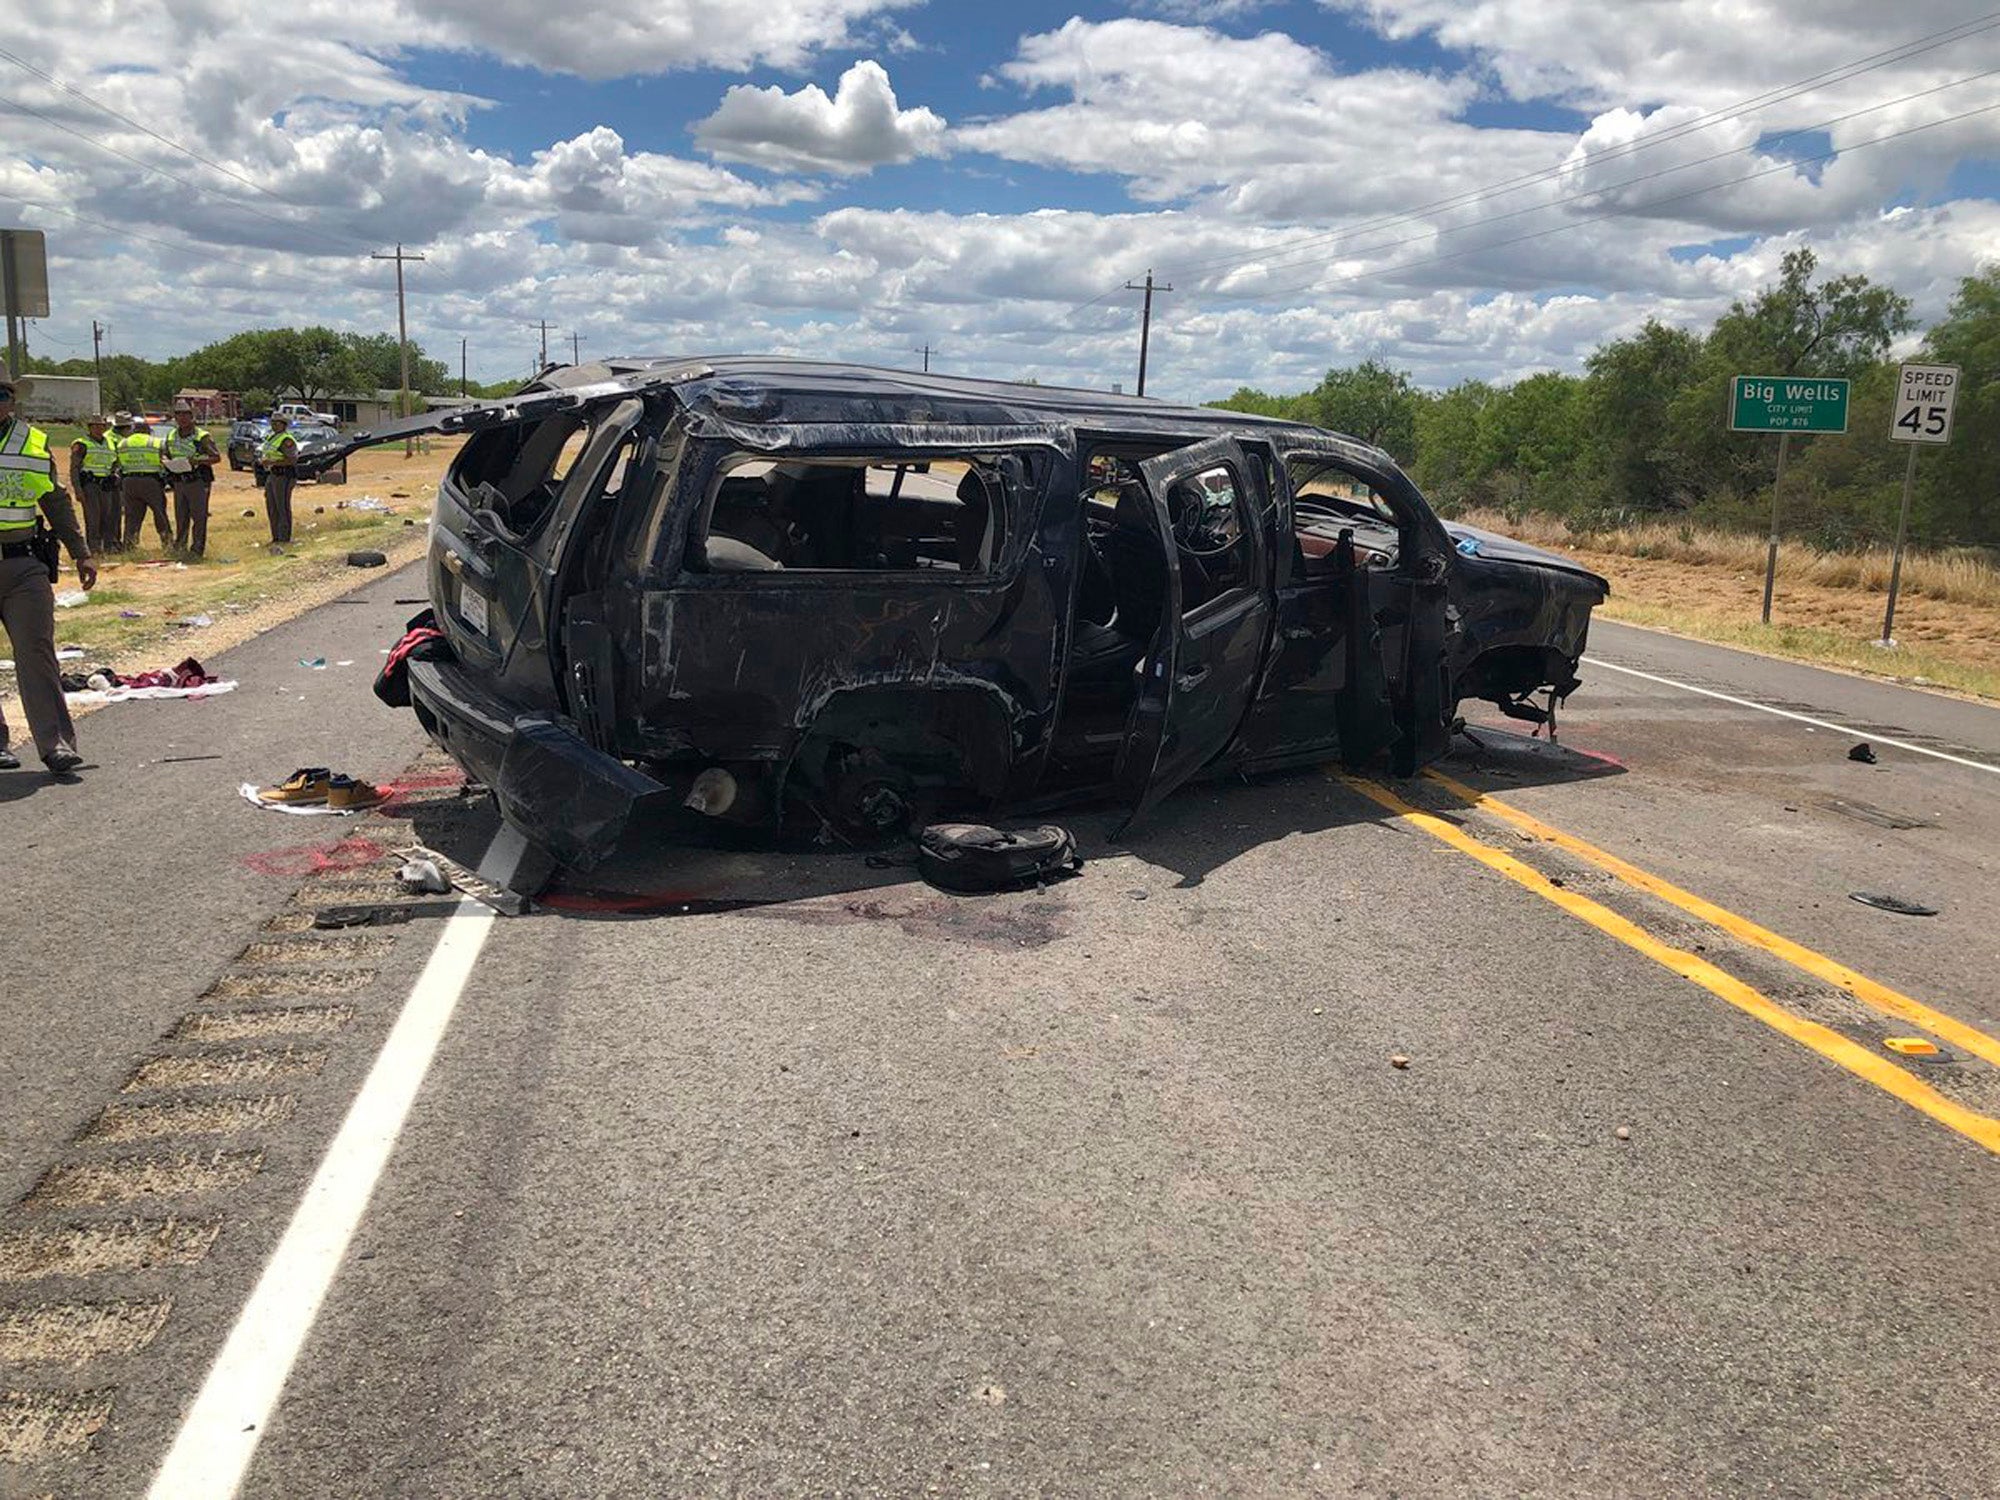 Damaged SUV is seen on Texas Highway 85 in Big Wells, Texas, after crashing while carrying more than a dozen people fleeing from Border Patrol agents, Sunday, June 17, 2018